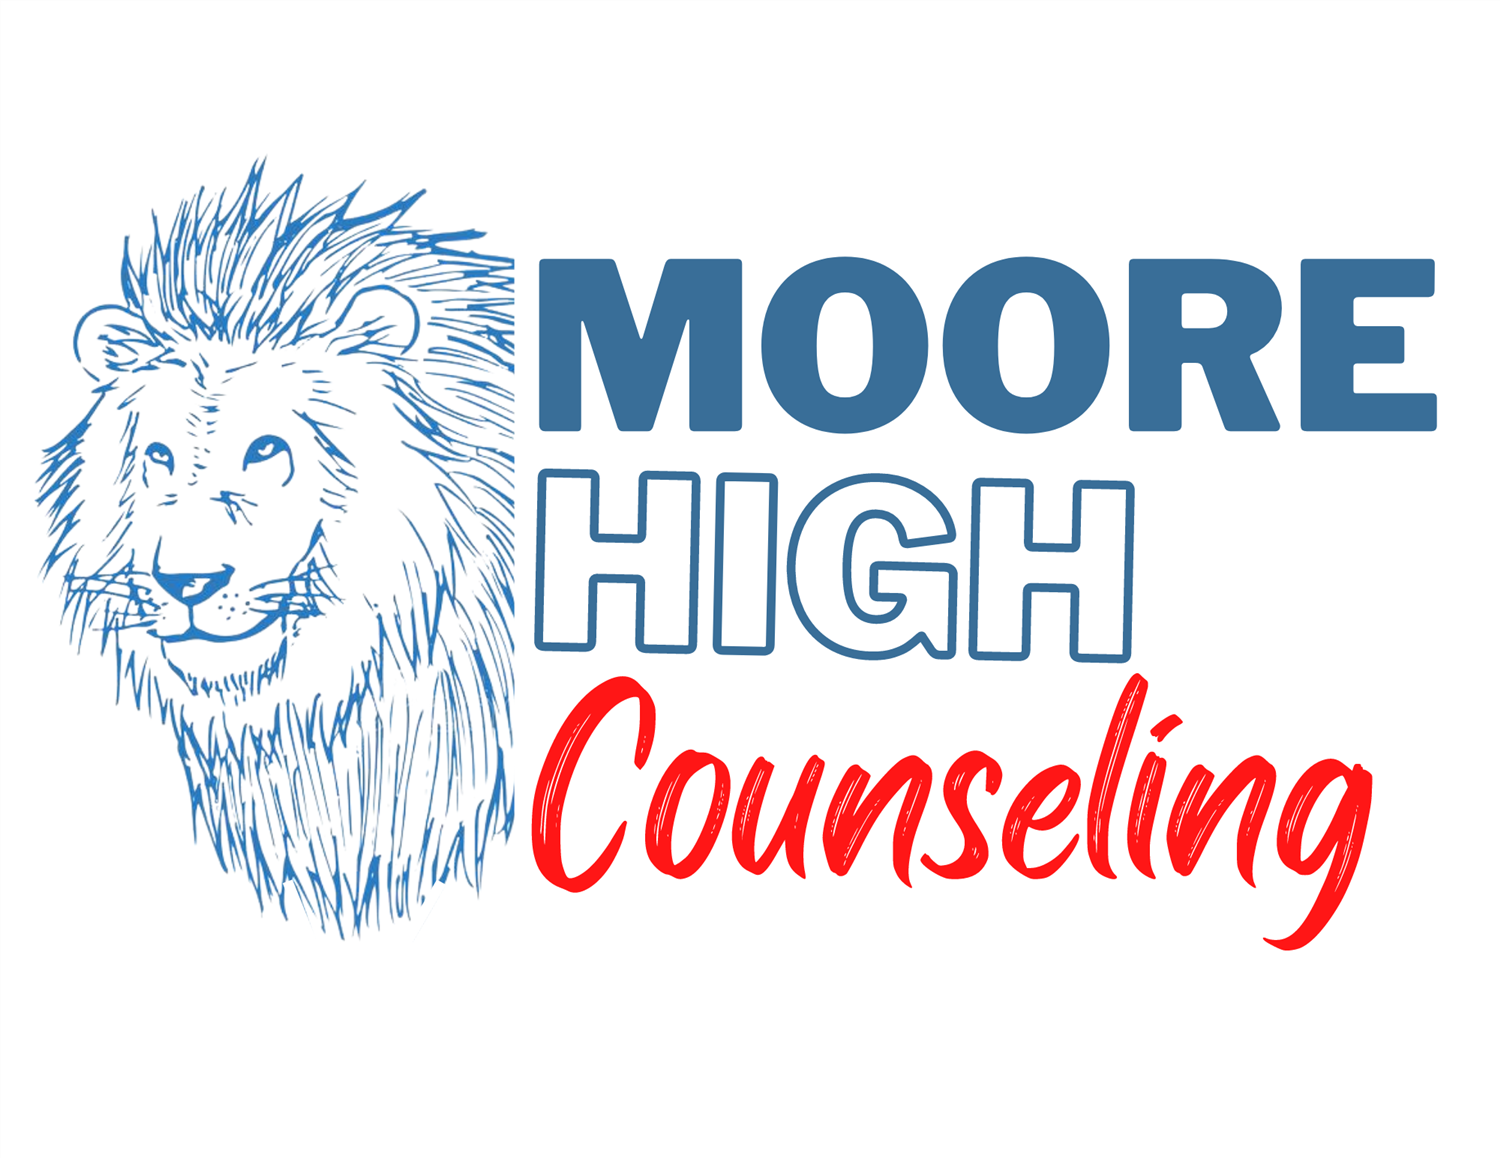 Moore High Counseling